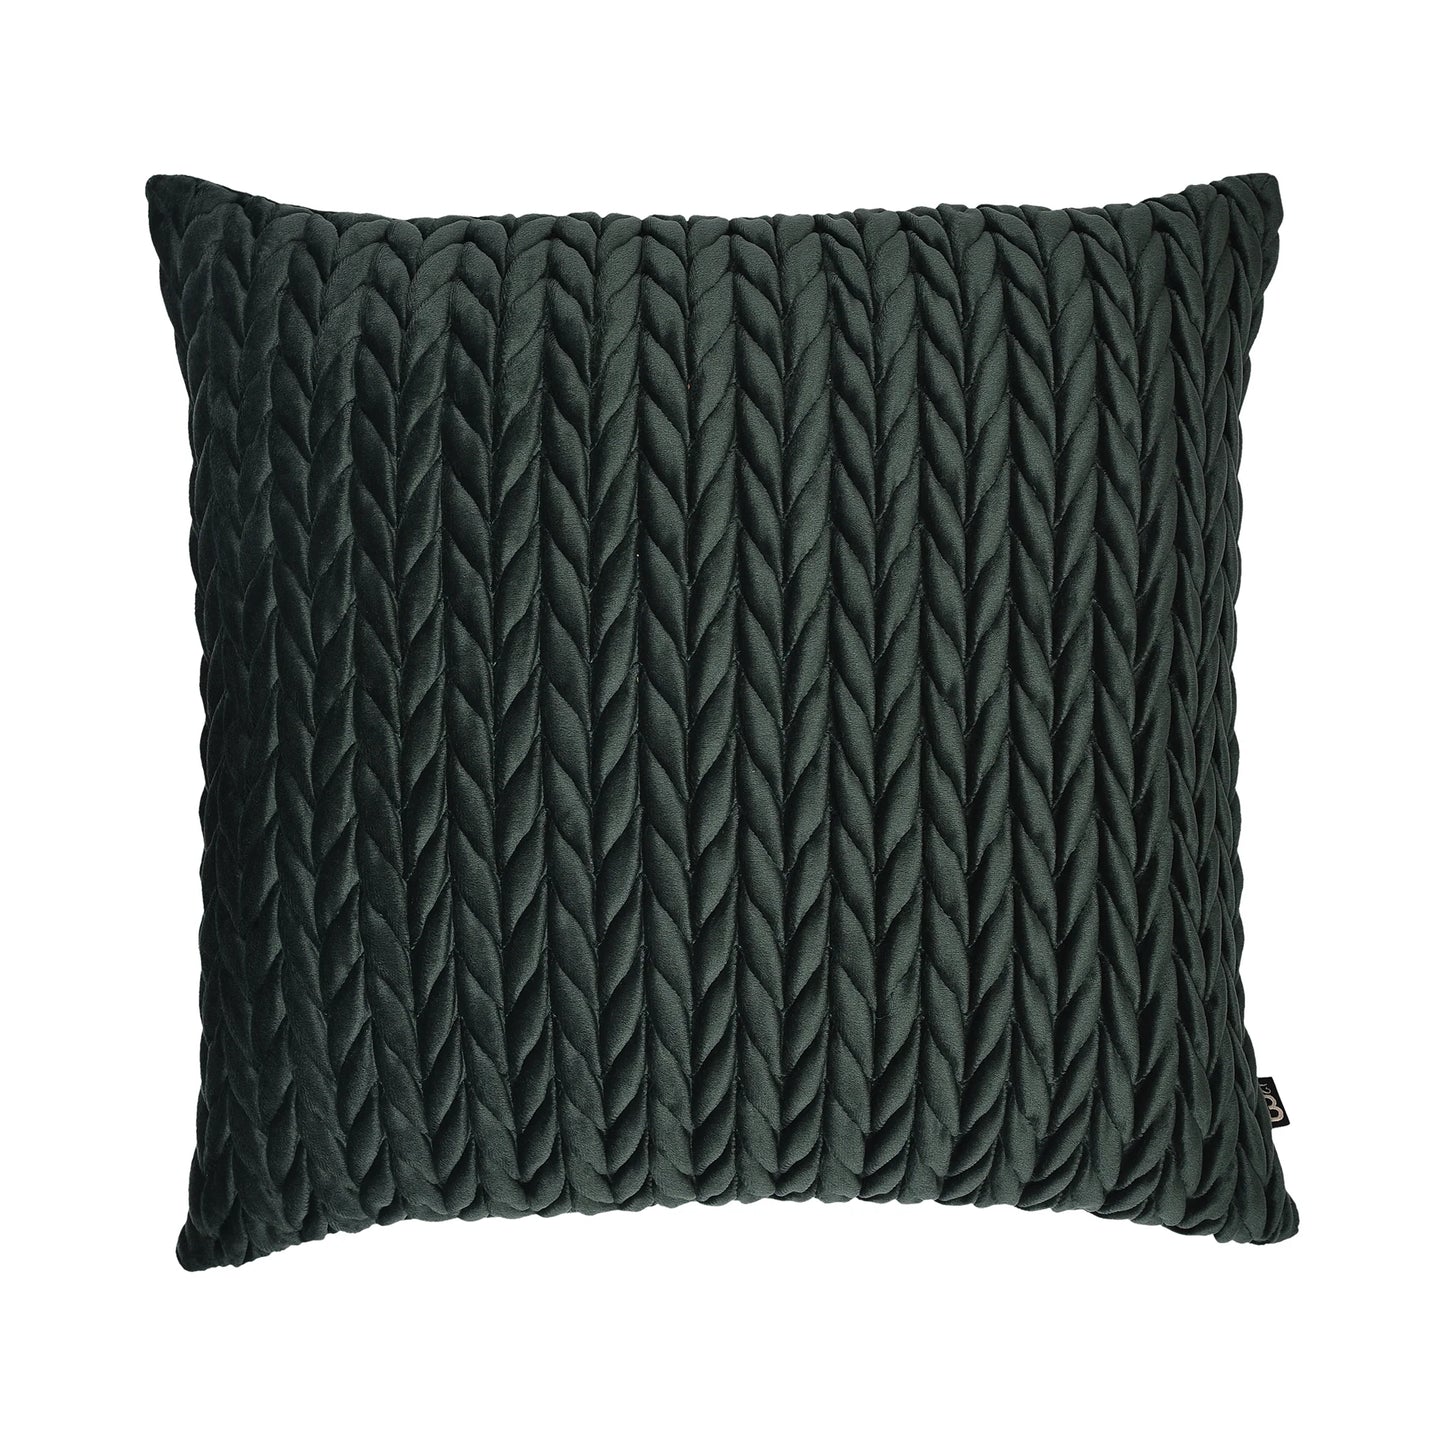 Cushion Cover-Amory in Bottle Green by Laurence Llewelyn Bowen